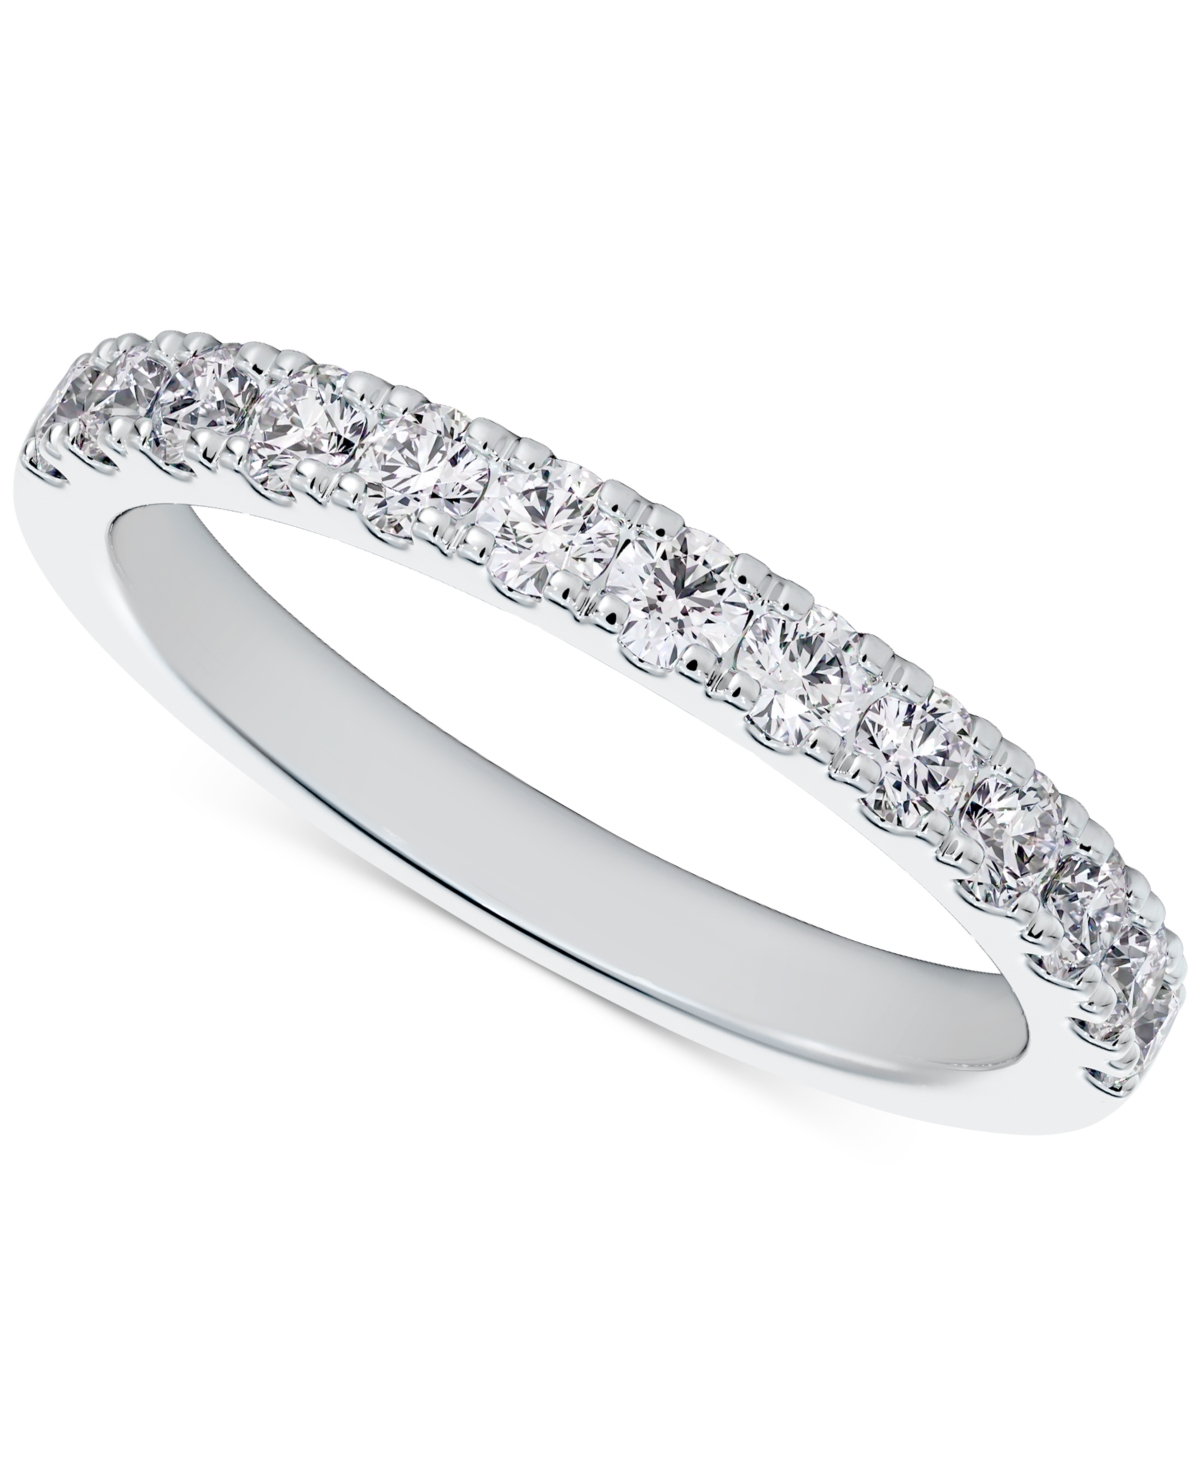 Portfolio by De Beers Forevermark Diamond French Pave Wedding Band (1 ct. t.w.) in 14k White Gold - White Gold